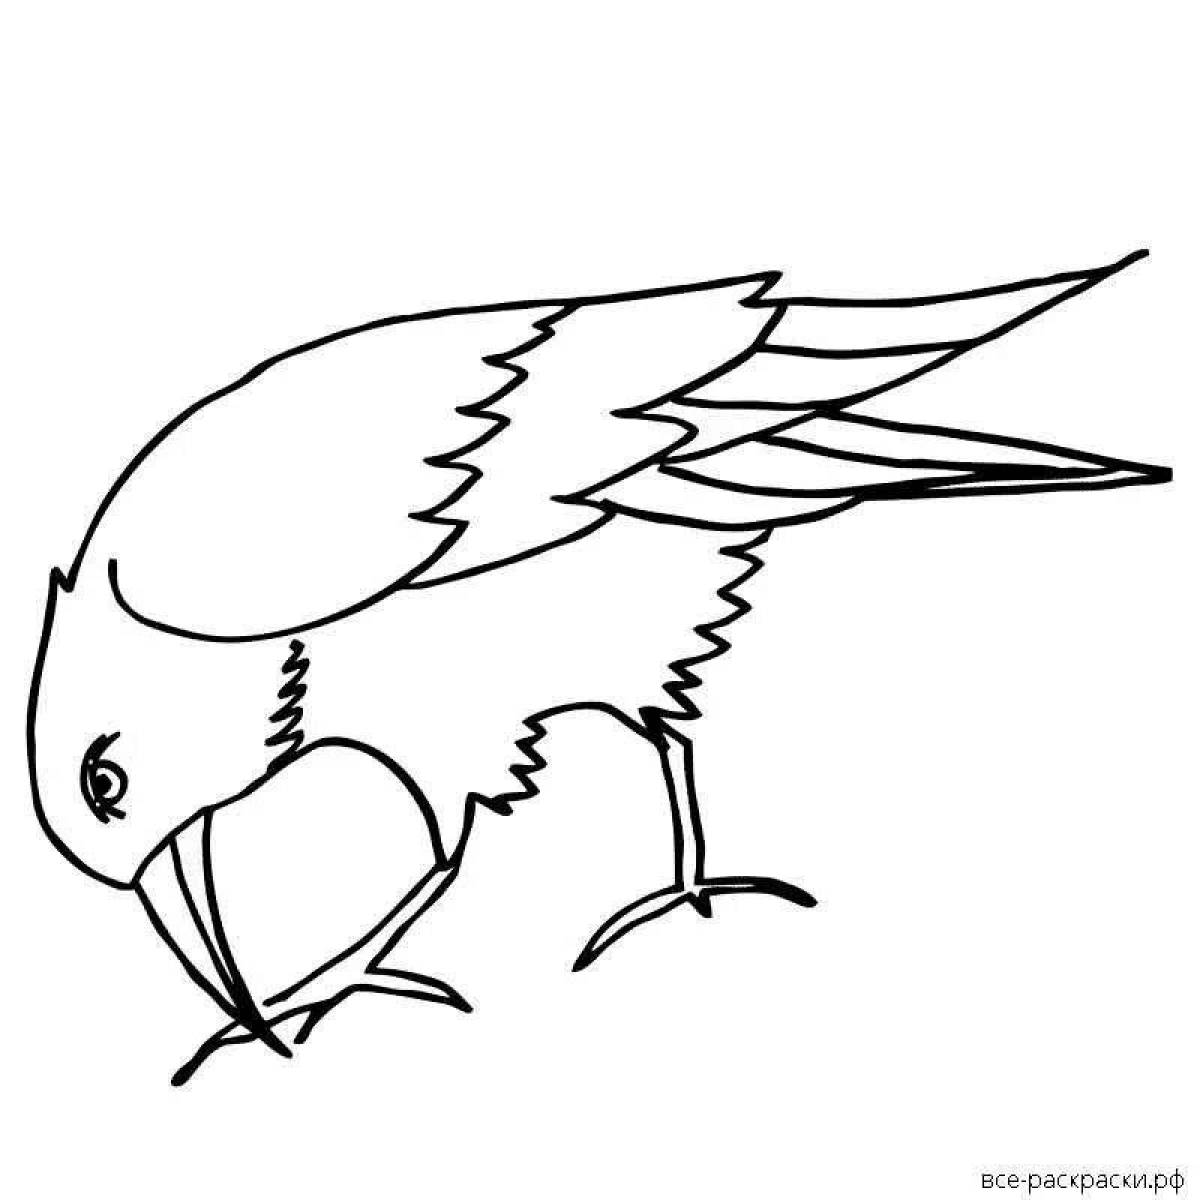 Fancy sparrow and crow coloring page